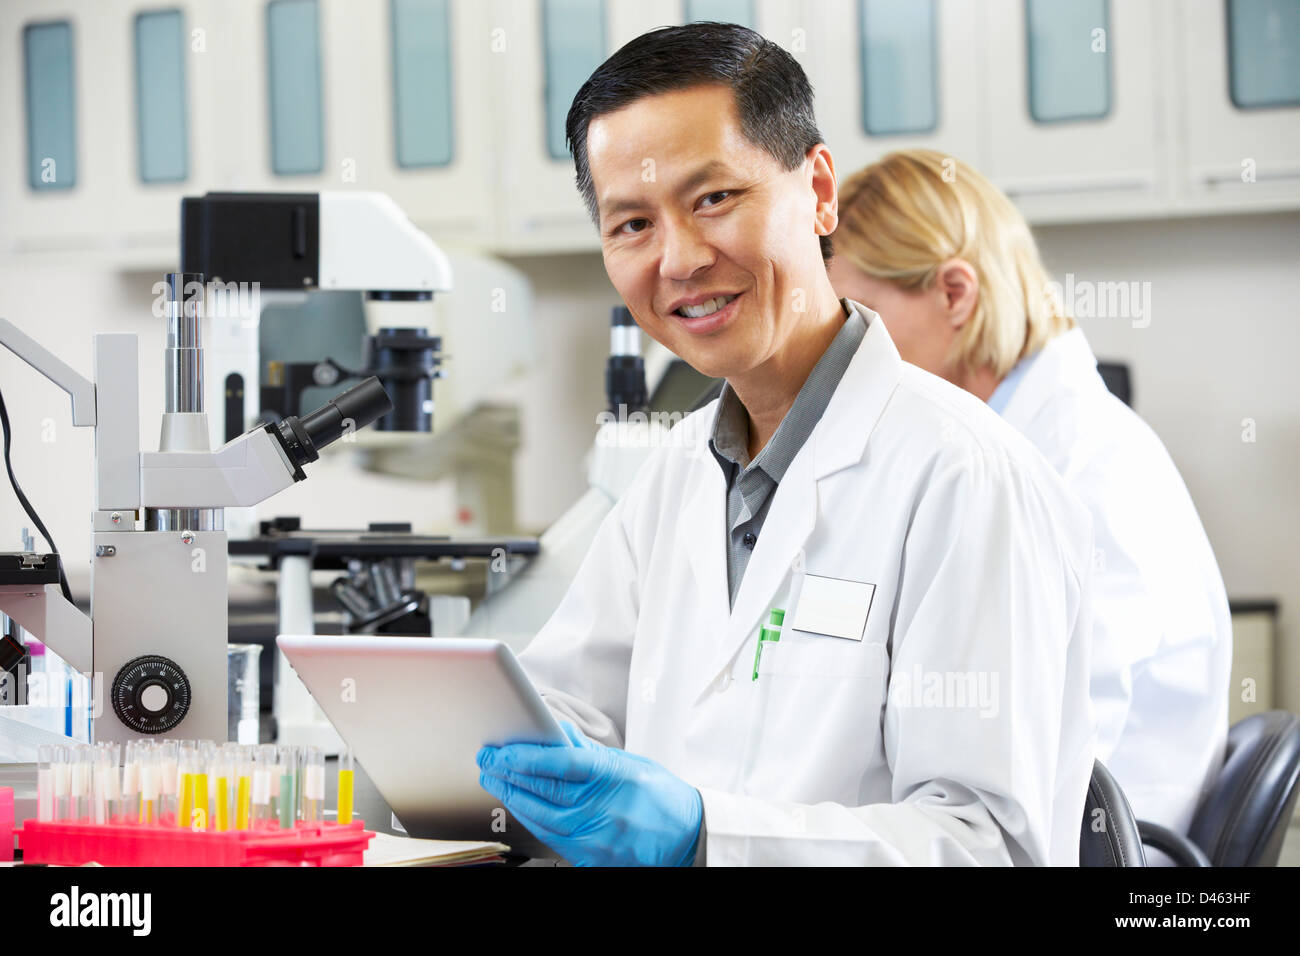 Male Scientist Using Tablet Computer In Laboratory Stock Photo